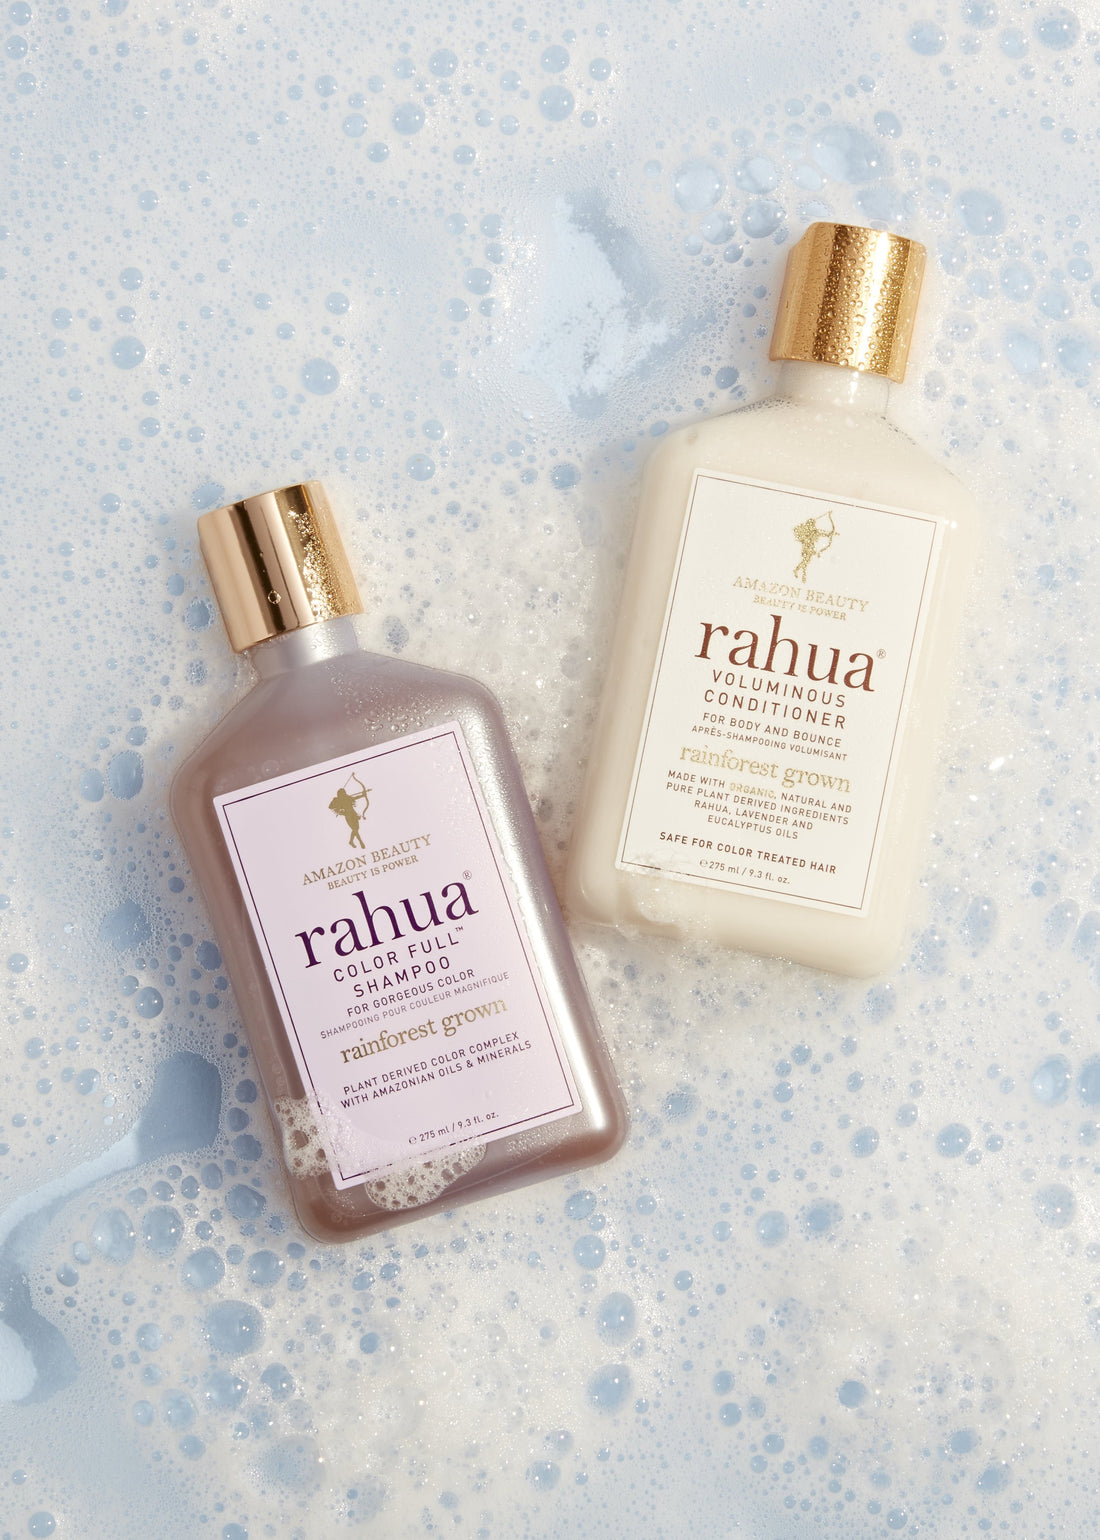 Rahua color full shampoo and voluminous conditioner on the floor with foam